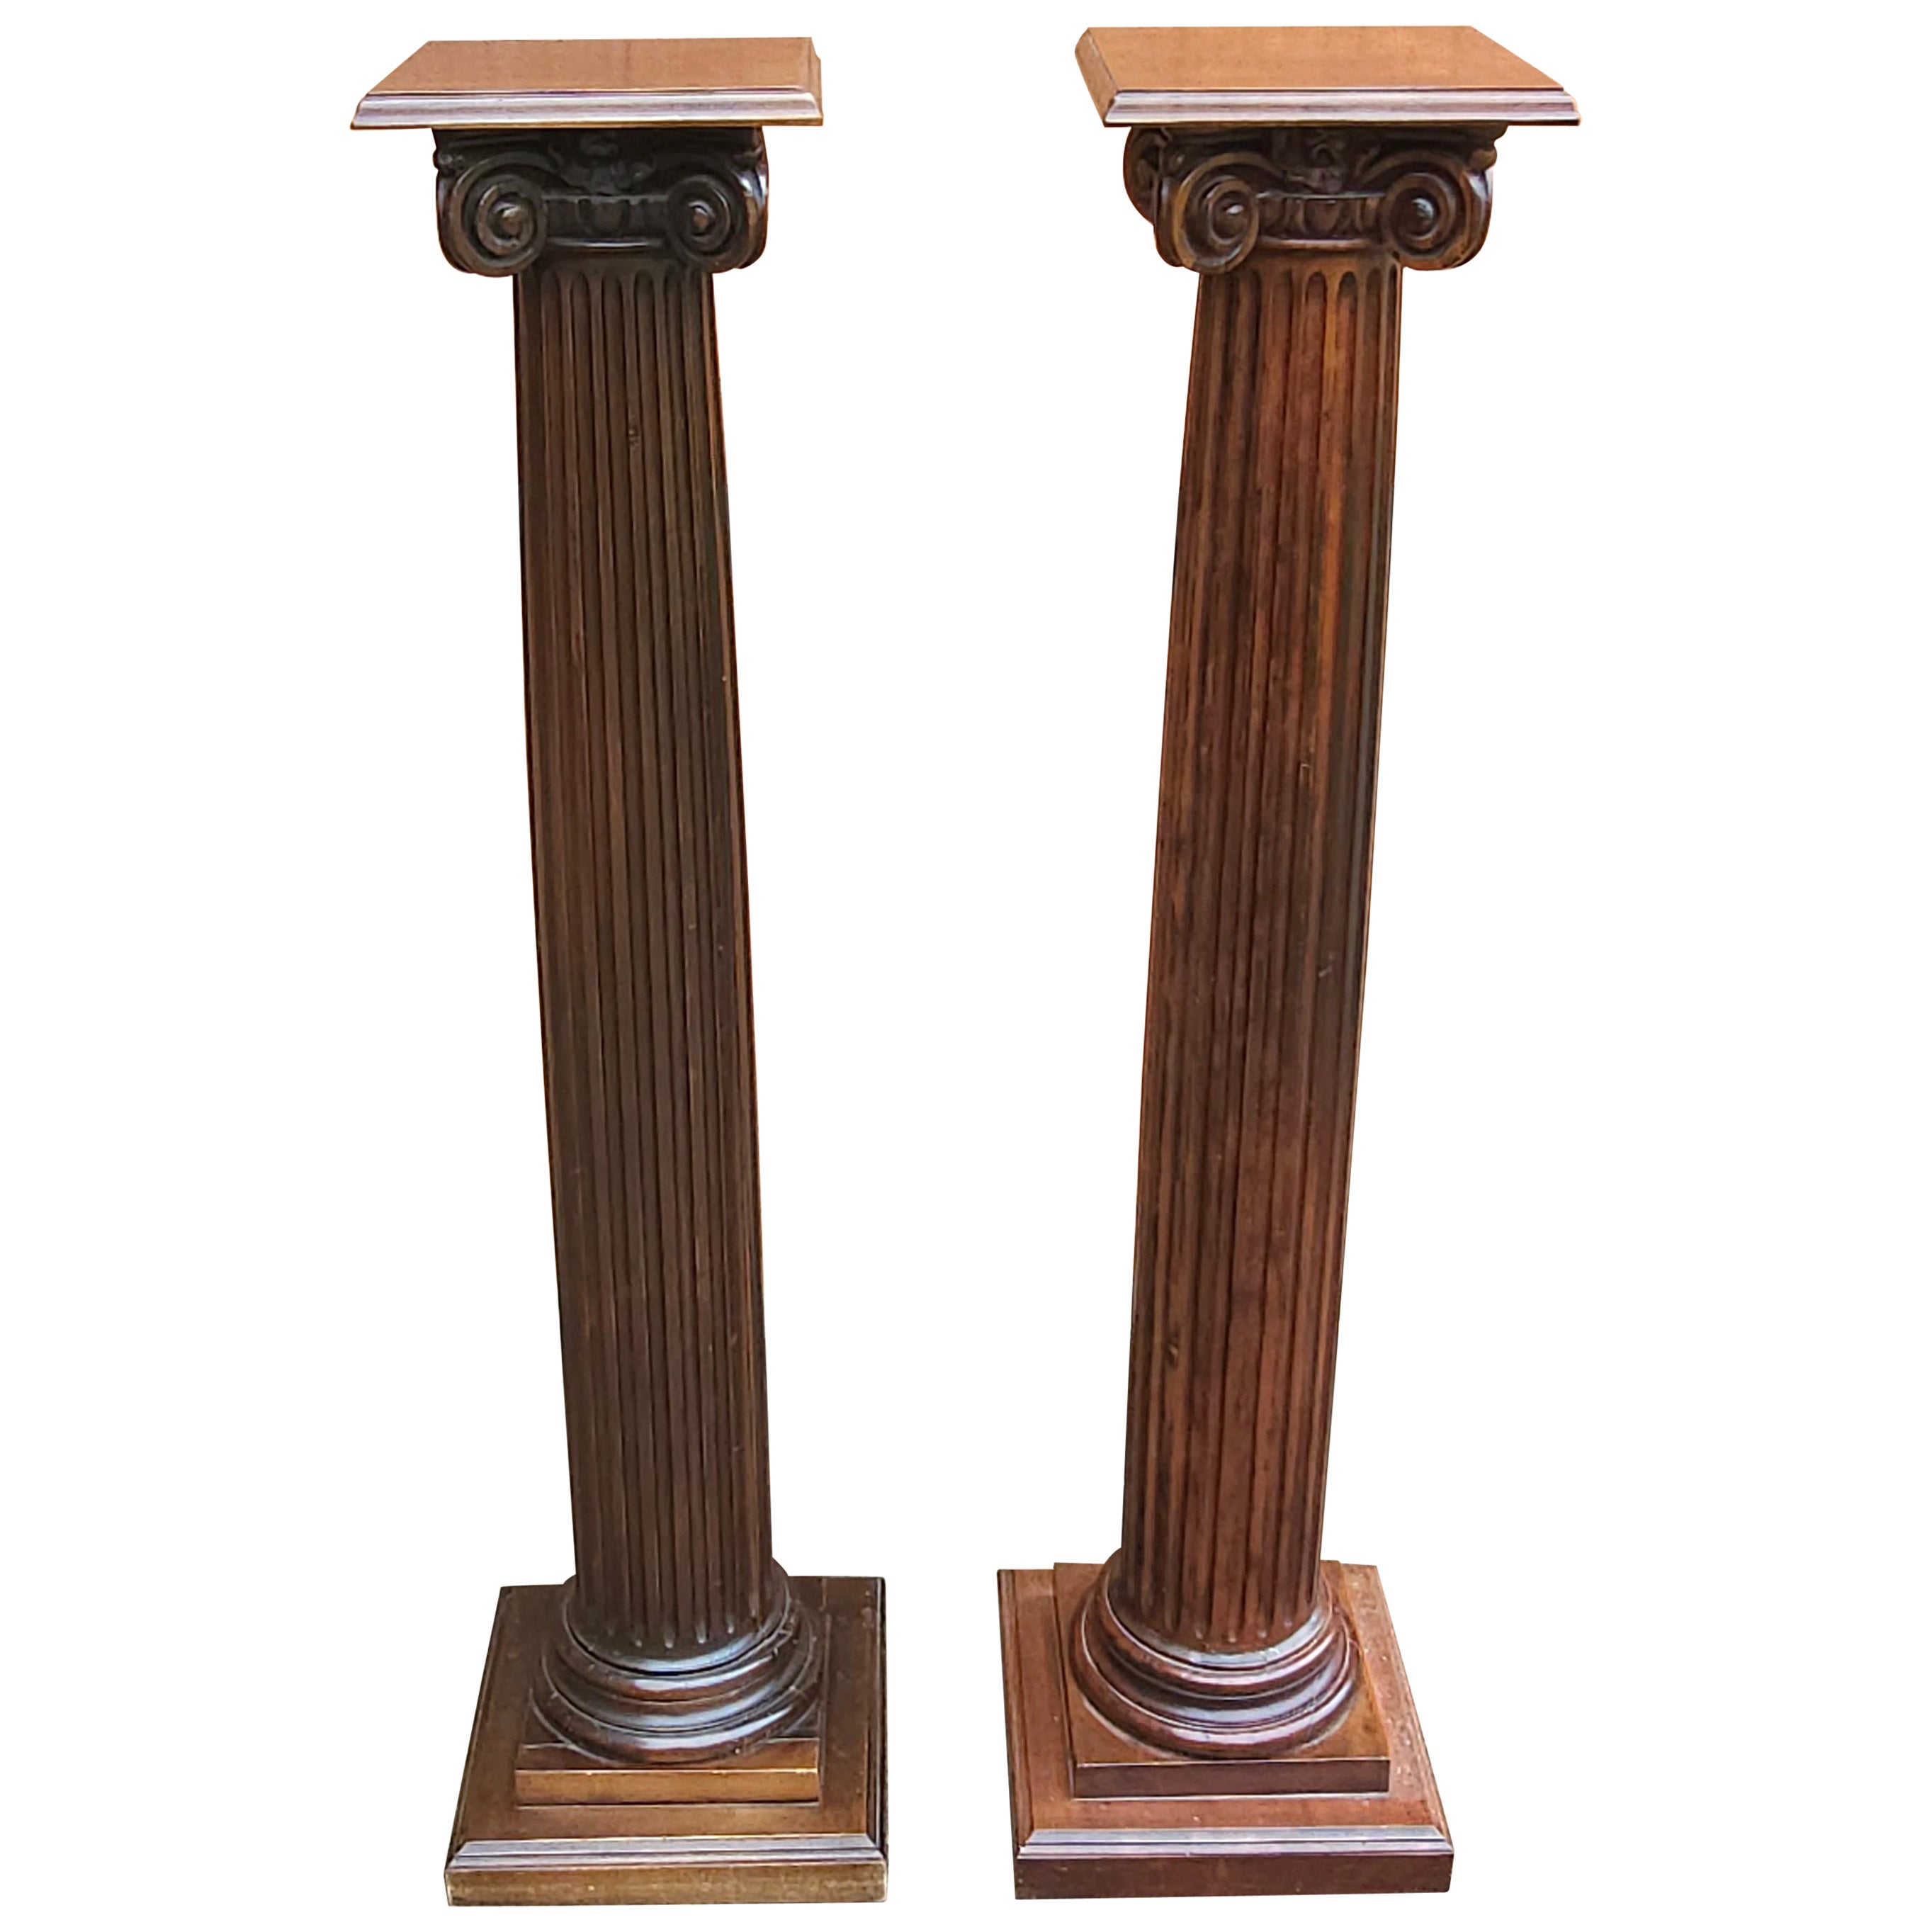 Pair Of Mahogany Ionic Order Style Column-Form Pedestals